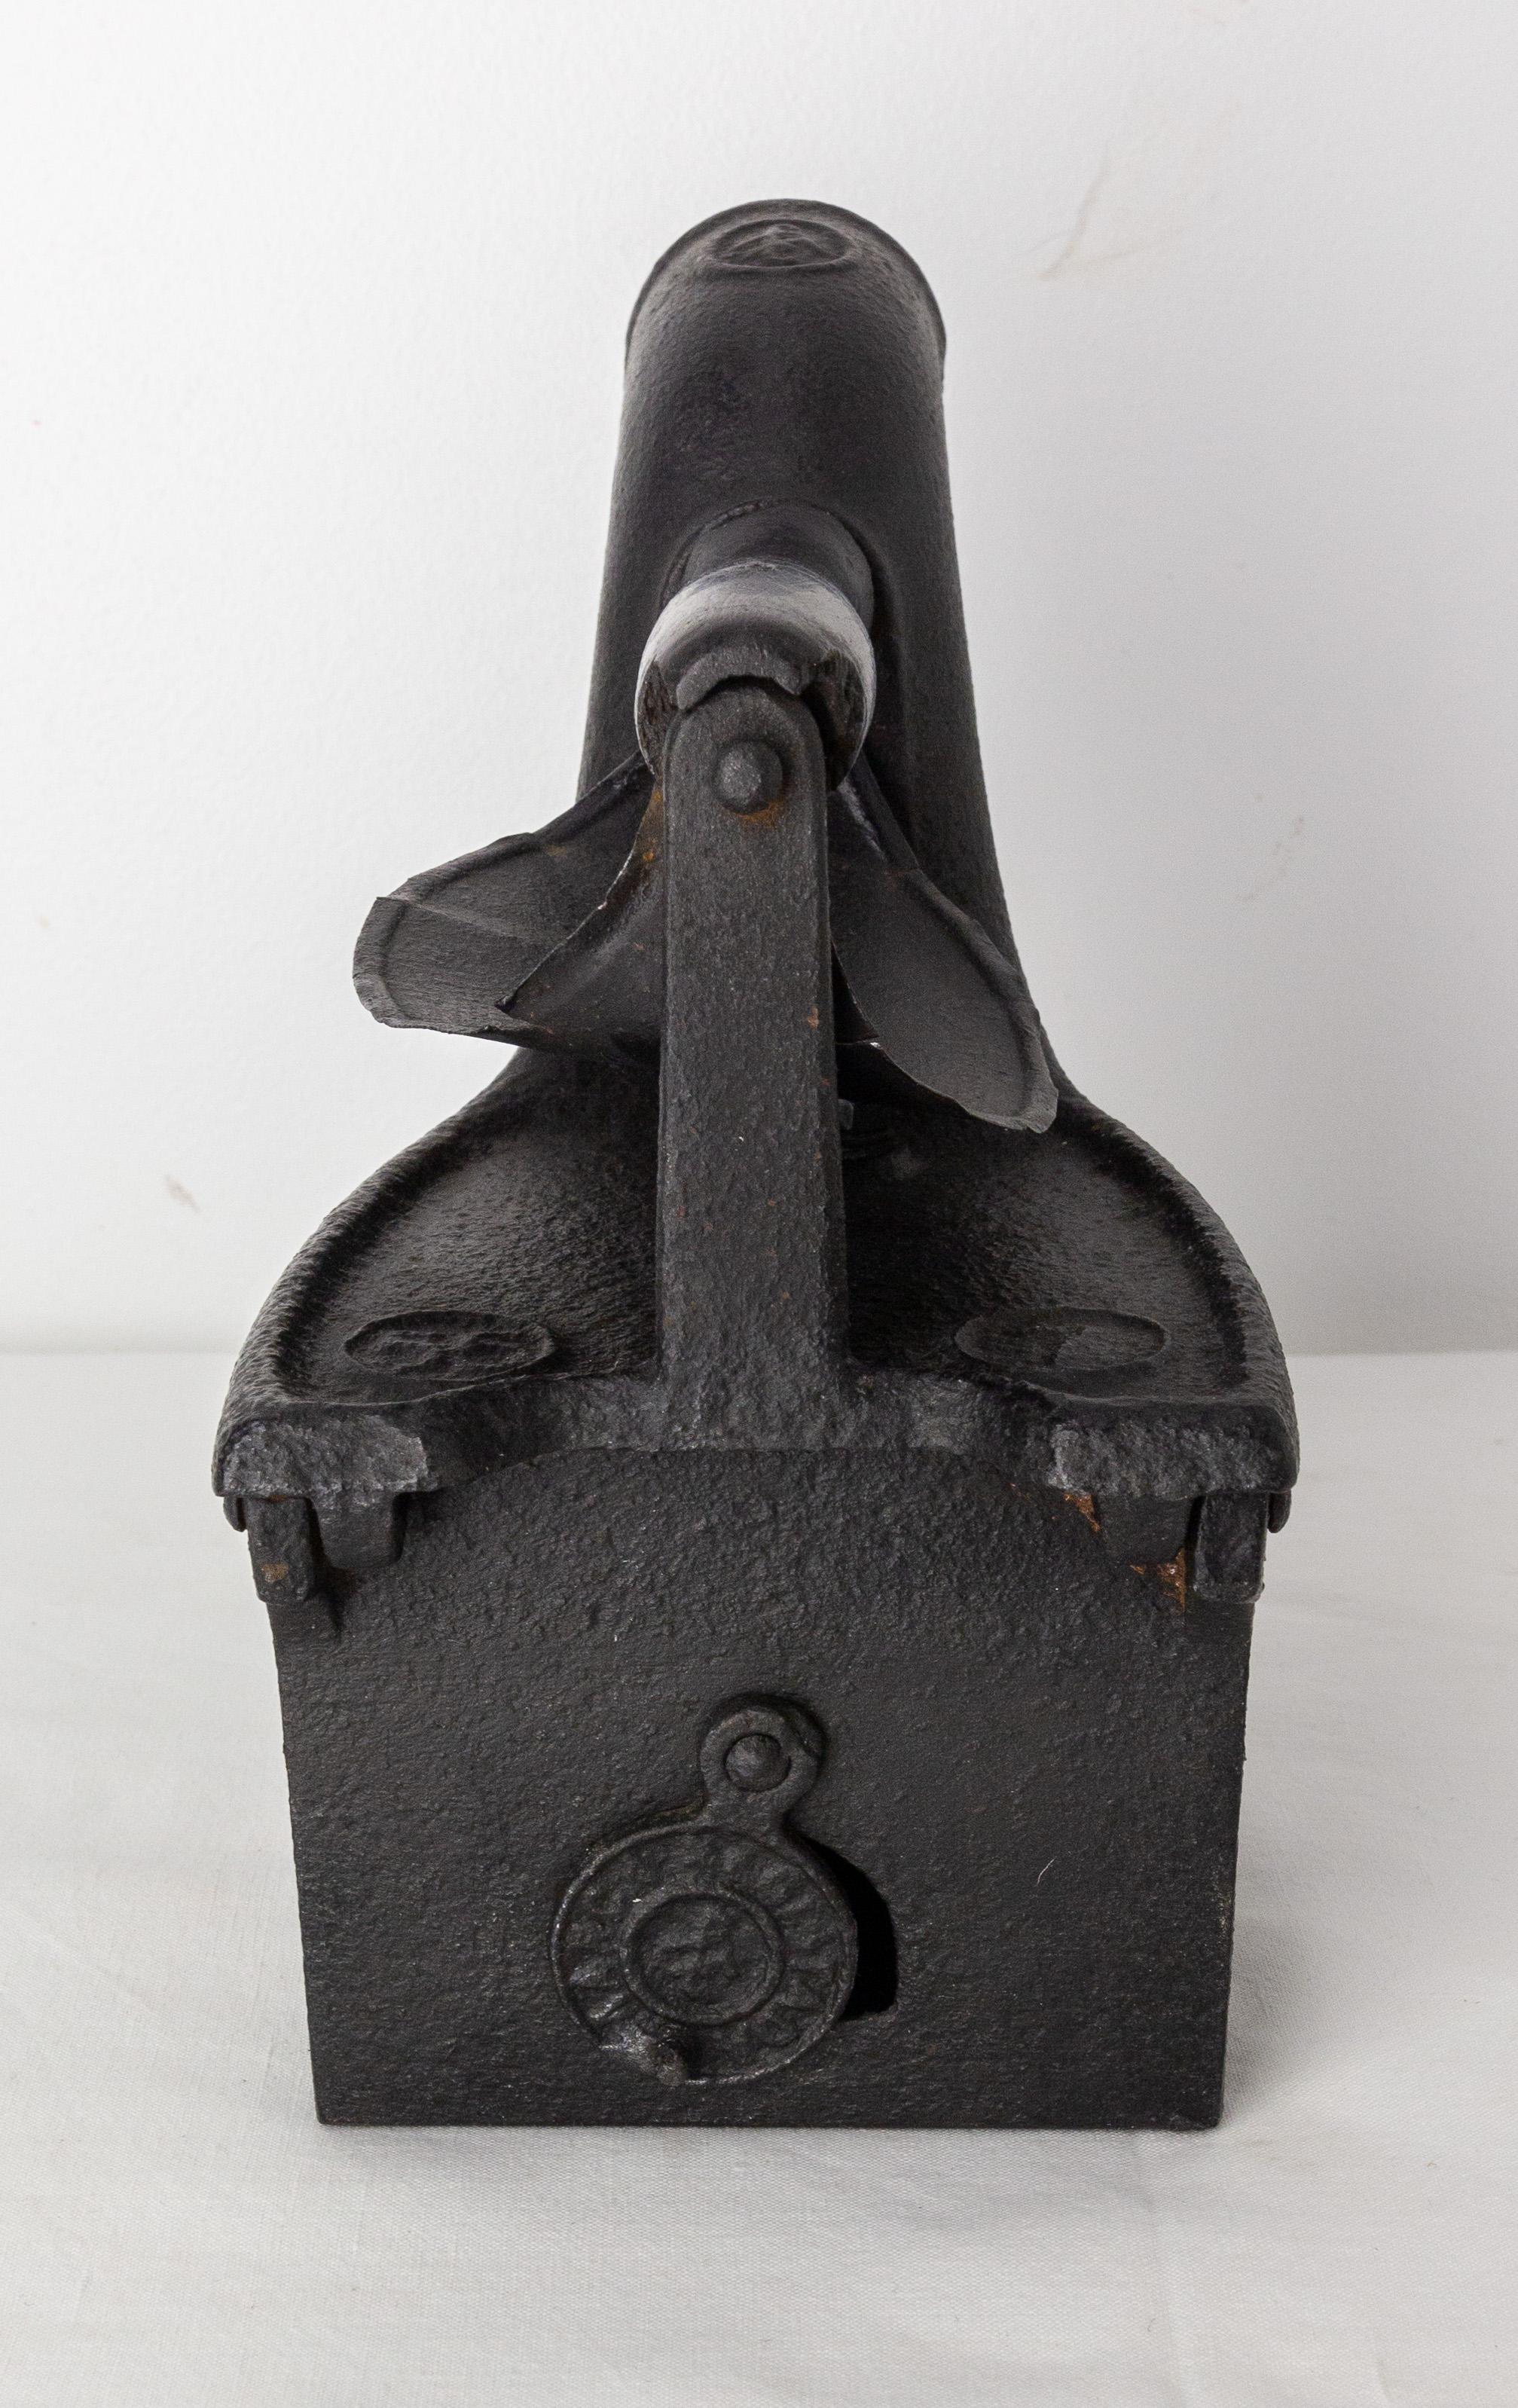 This cast iron trivet is particular Because it was created to put braises inside. 
This type of model represented a step forward for the laundress because it allowed to iron longer without having to rest the iron on the stove.
To allow the embers